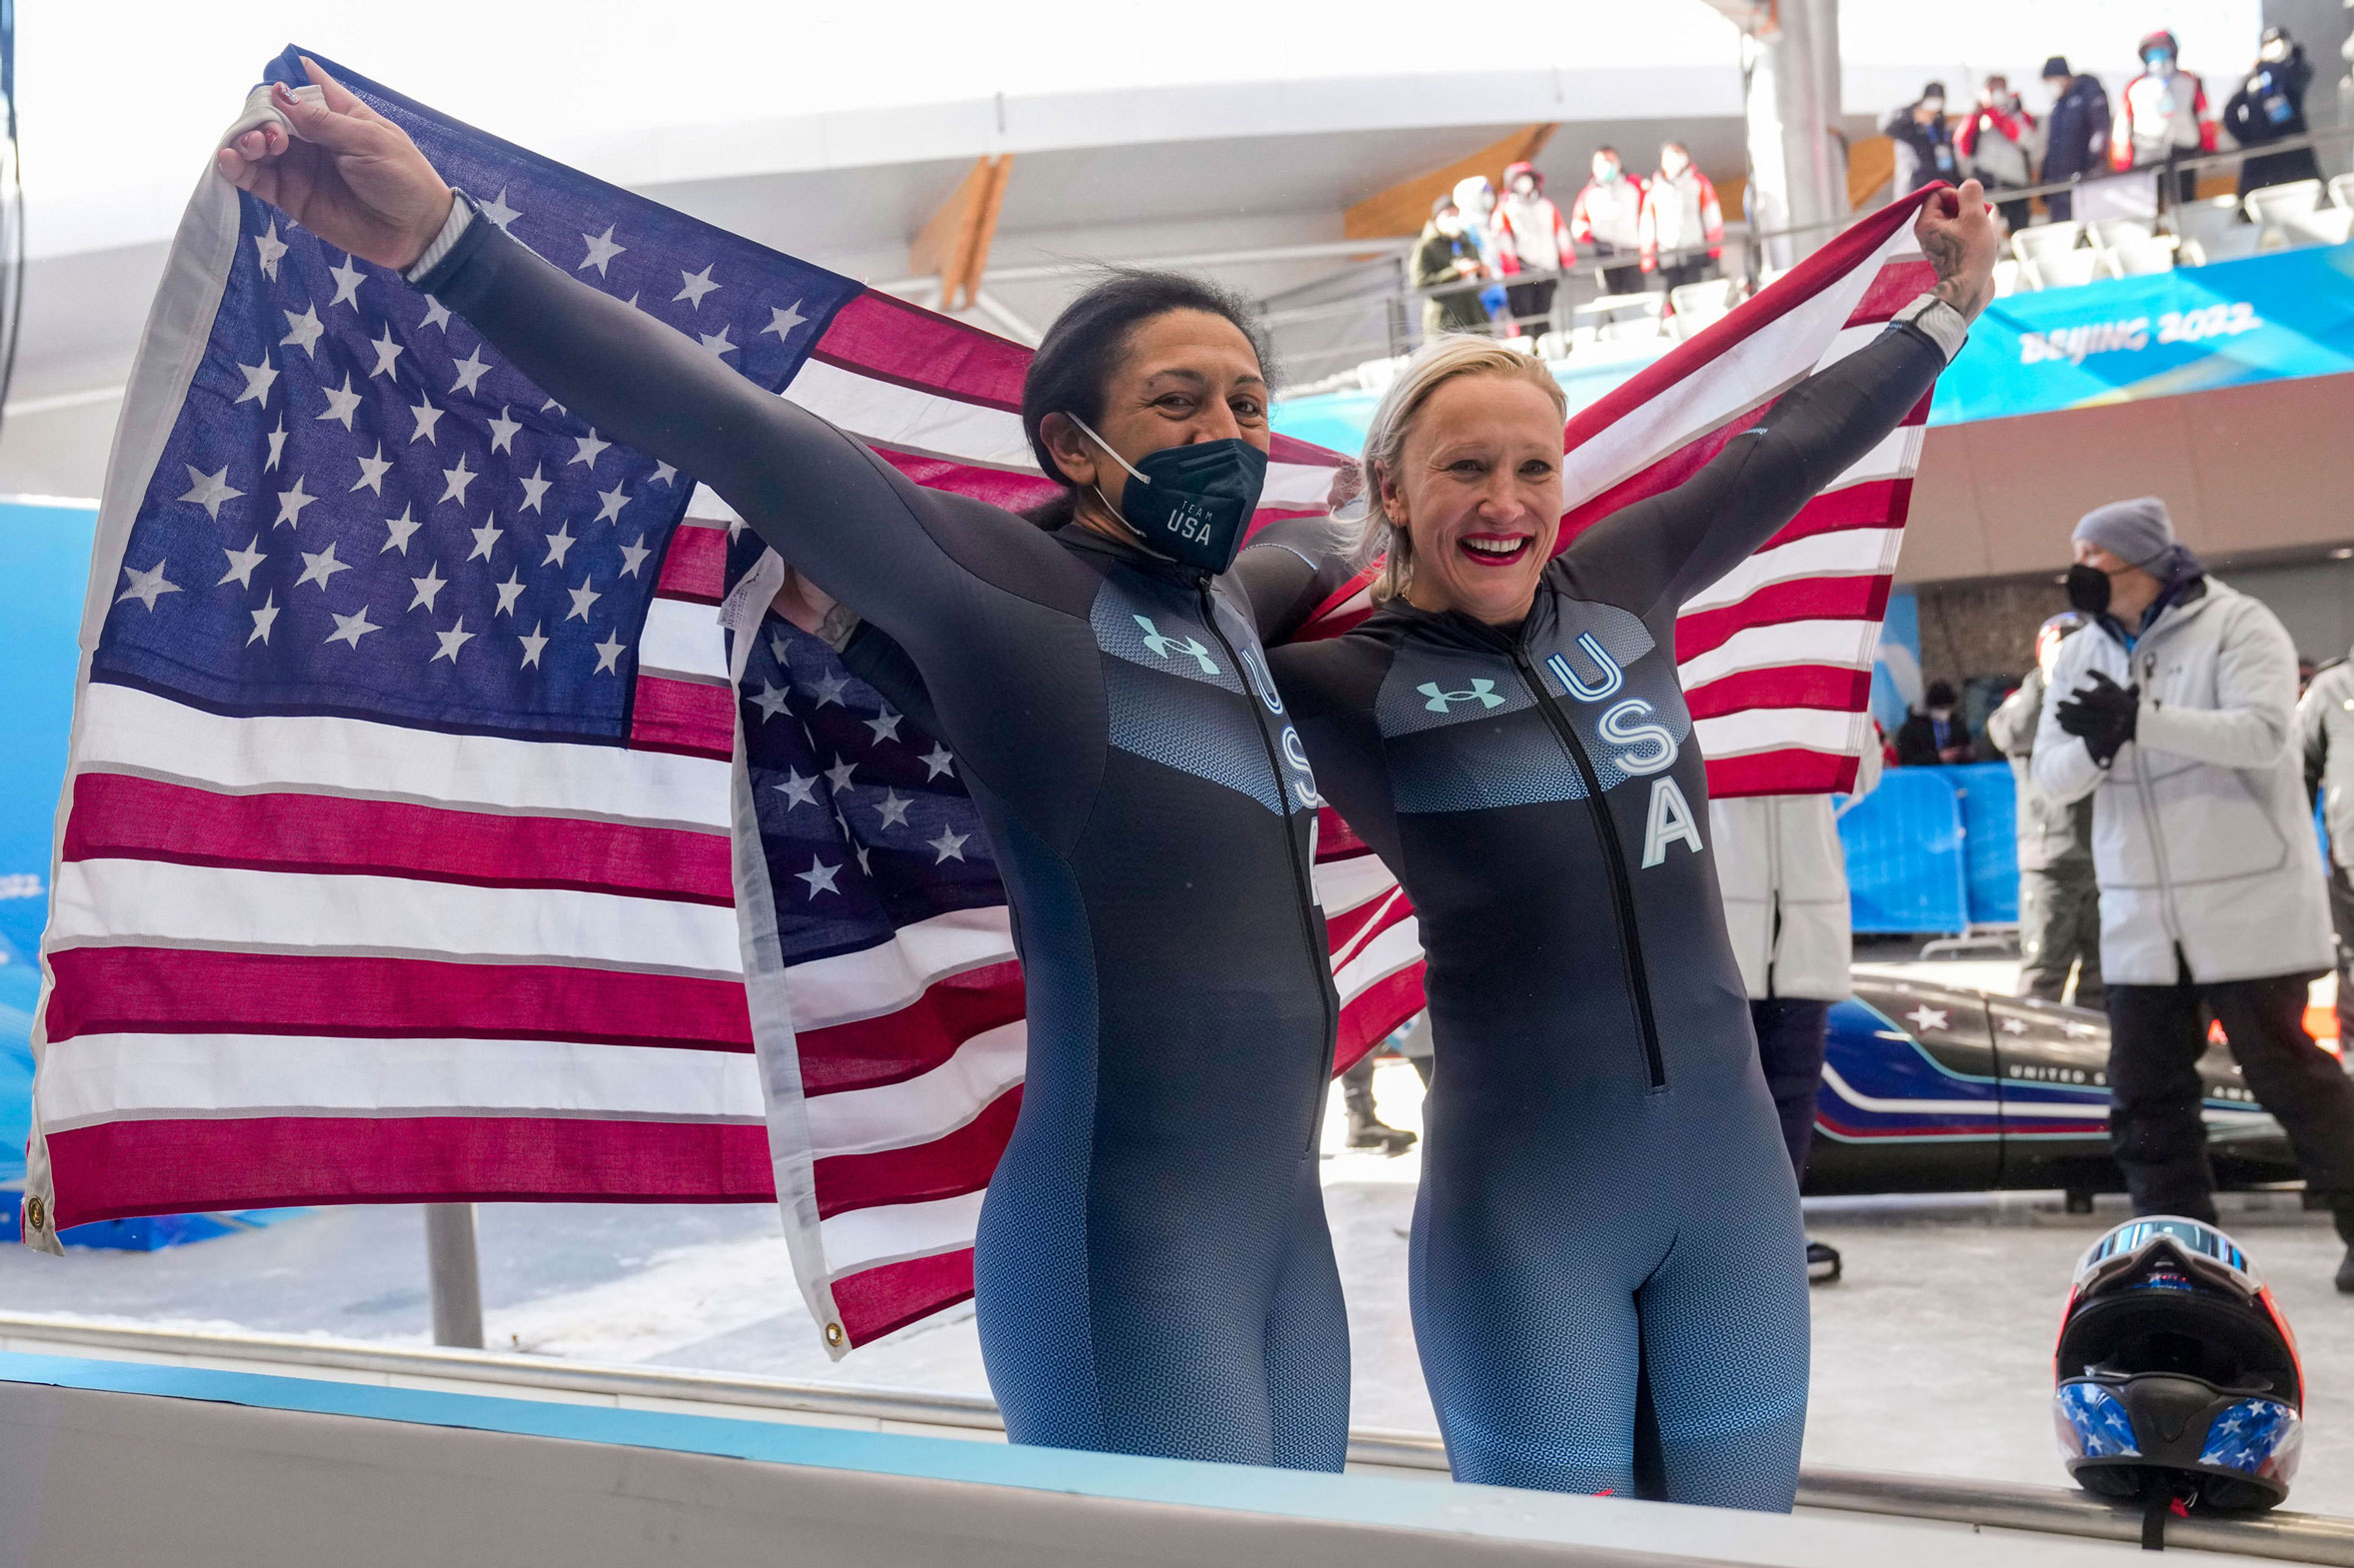 Kaillie Humphries (right) and her teammate Elana Meyers Taylor celebrate winning the gold and silver medals in the women's monobob on Monday.